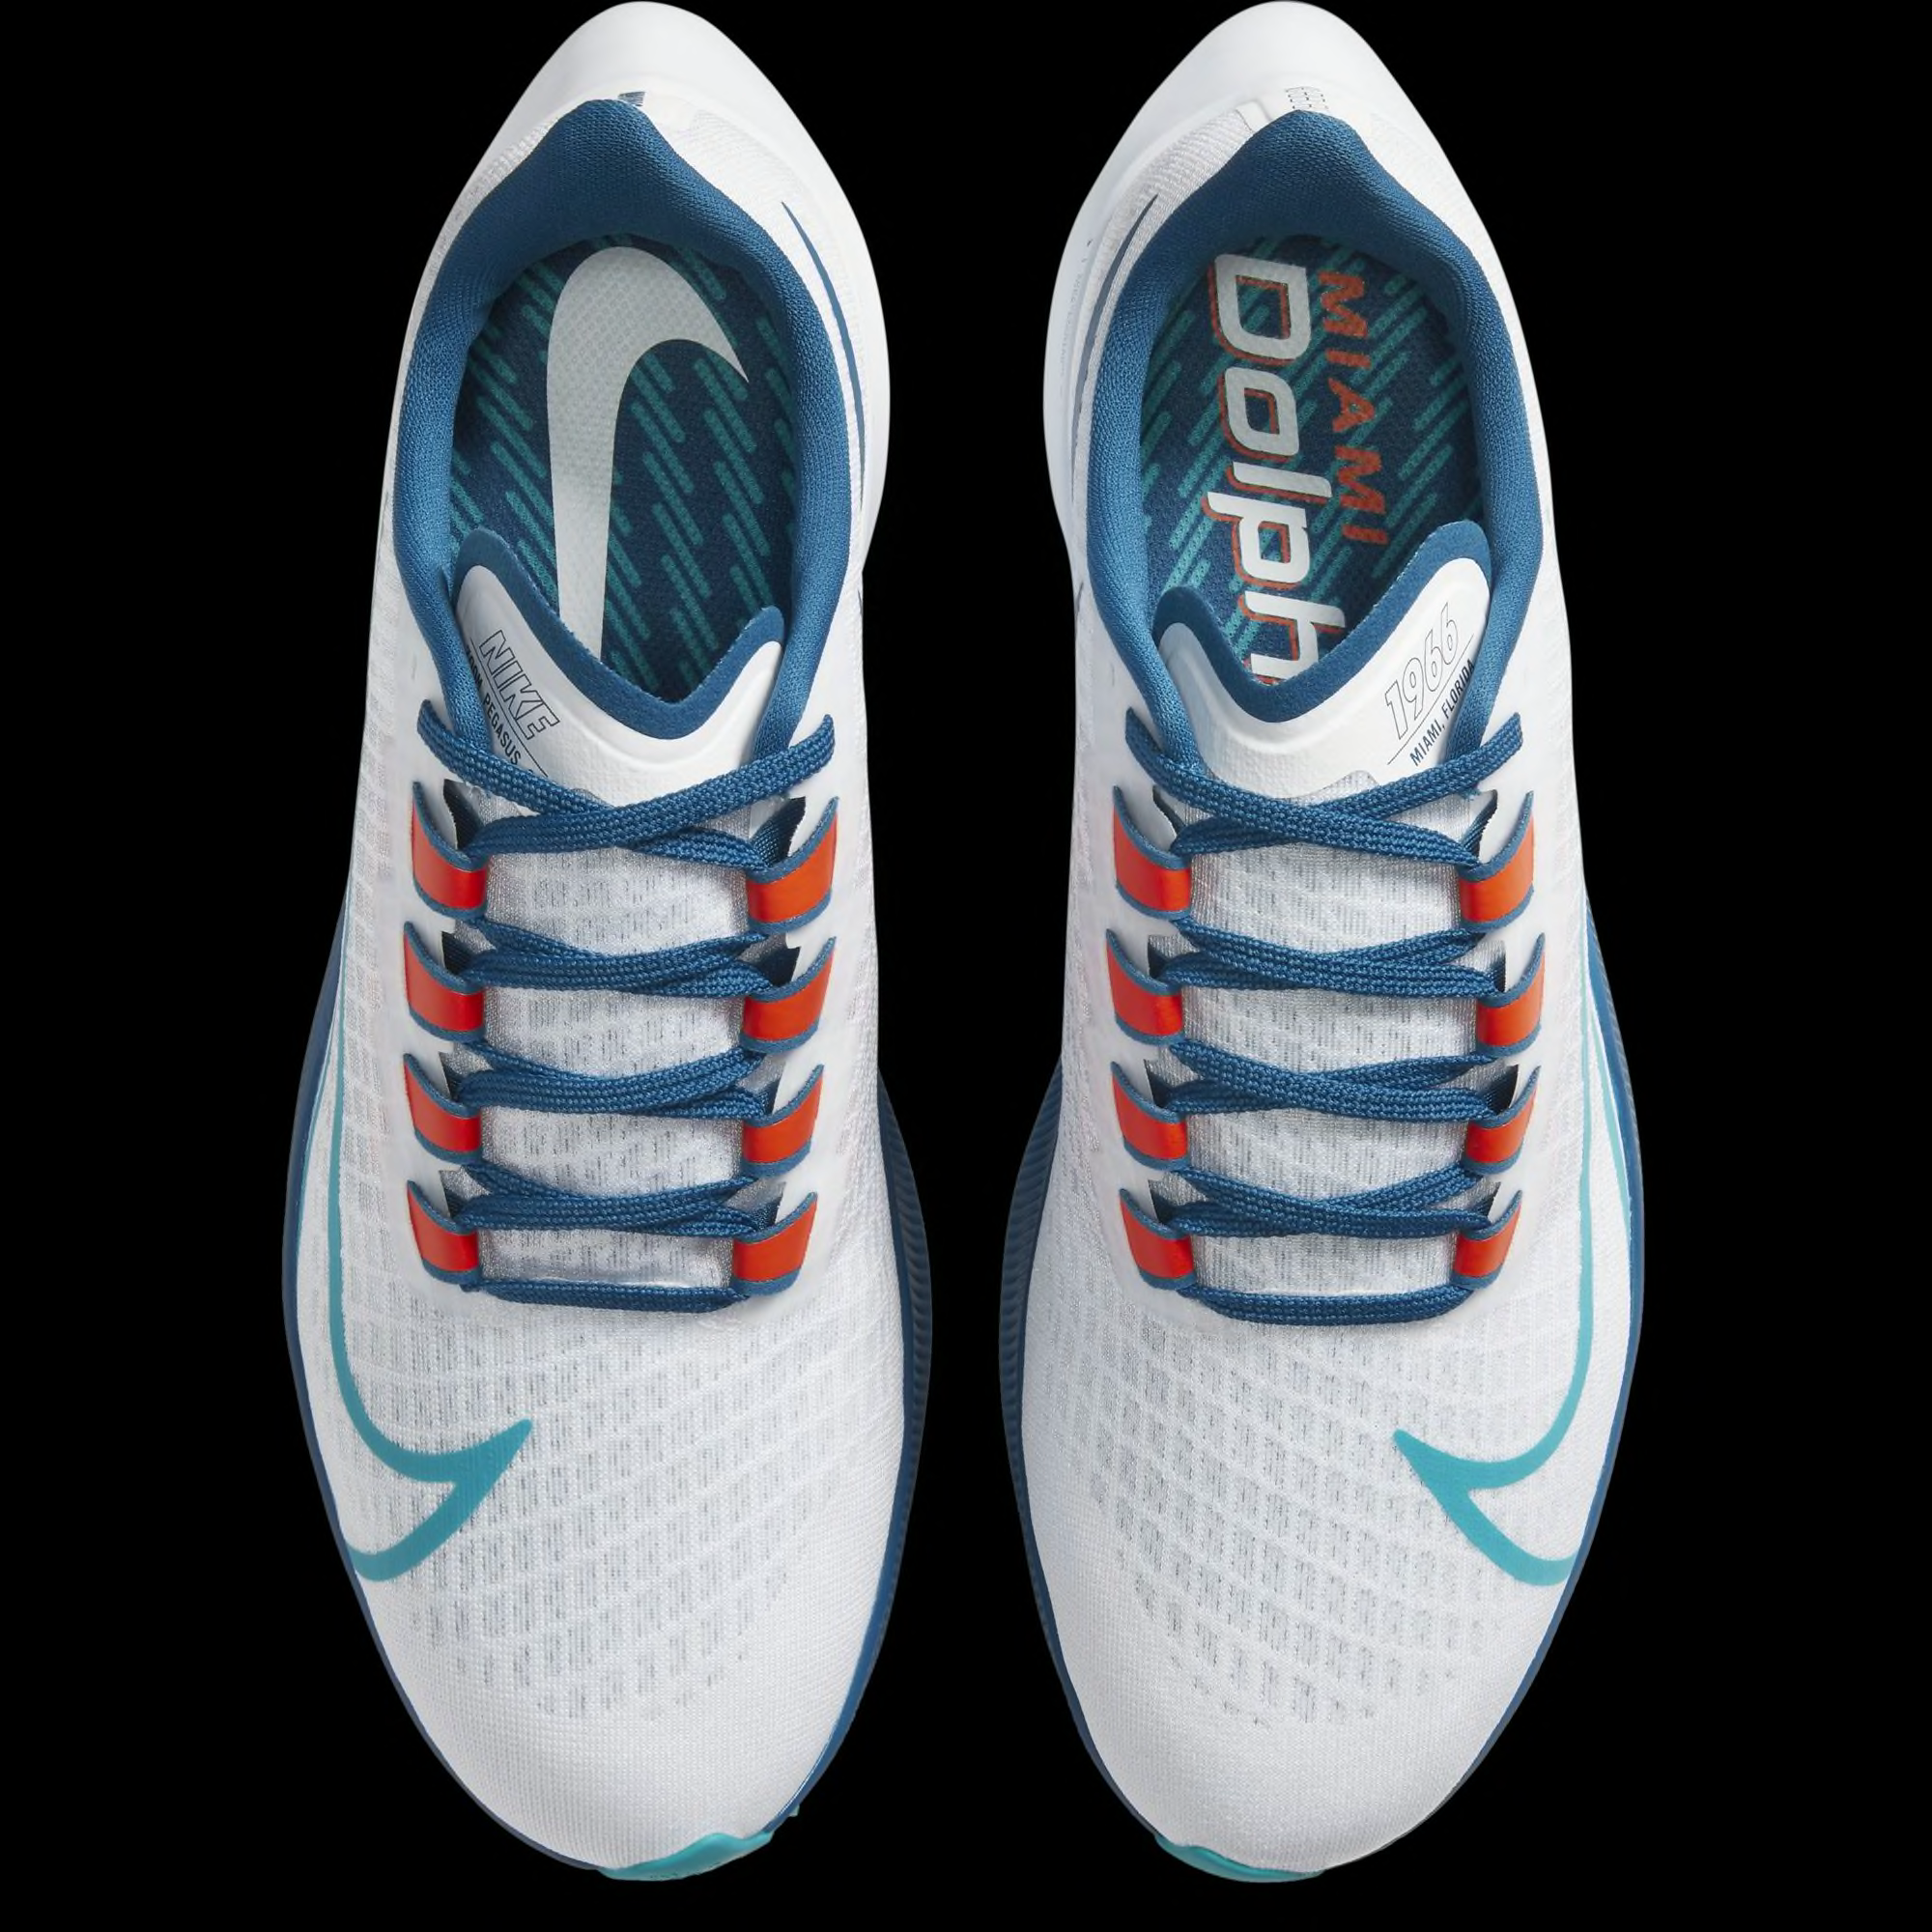 Order Your Miami Dolphins Nike Air Zoom Shoes Today | tyello.com